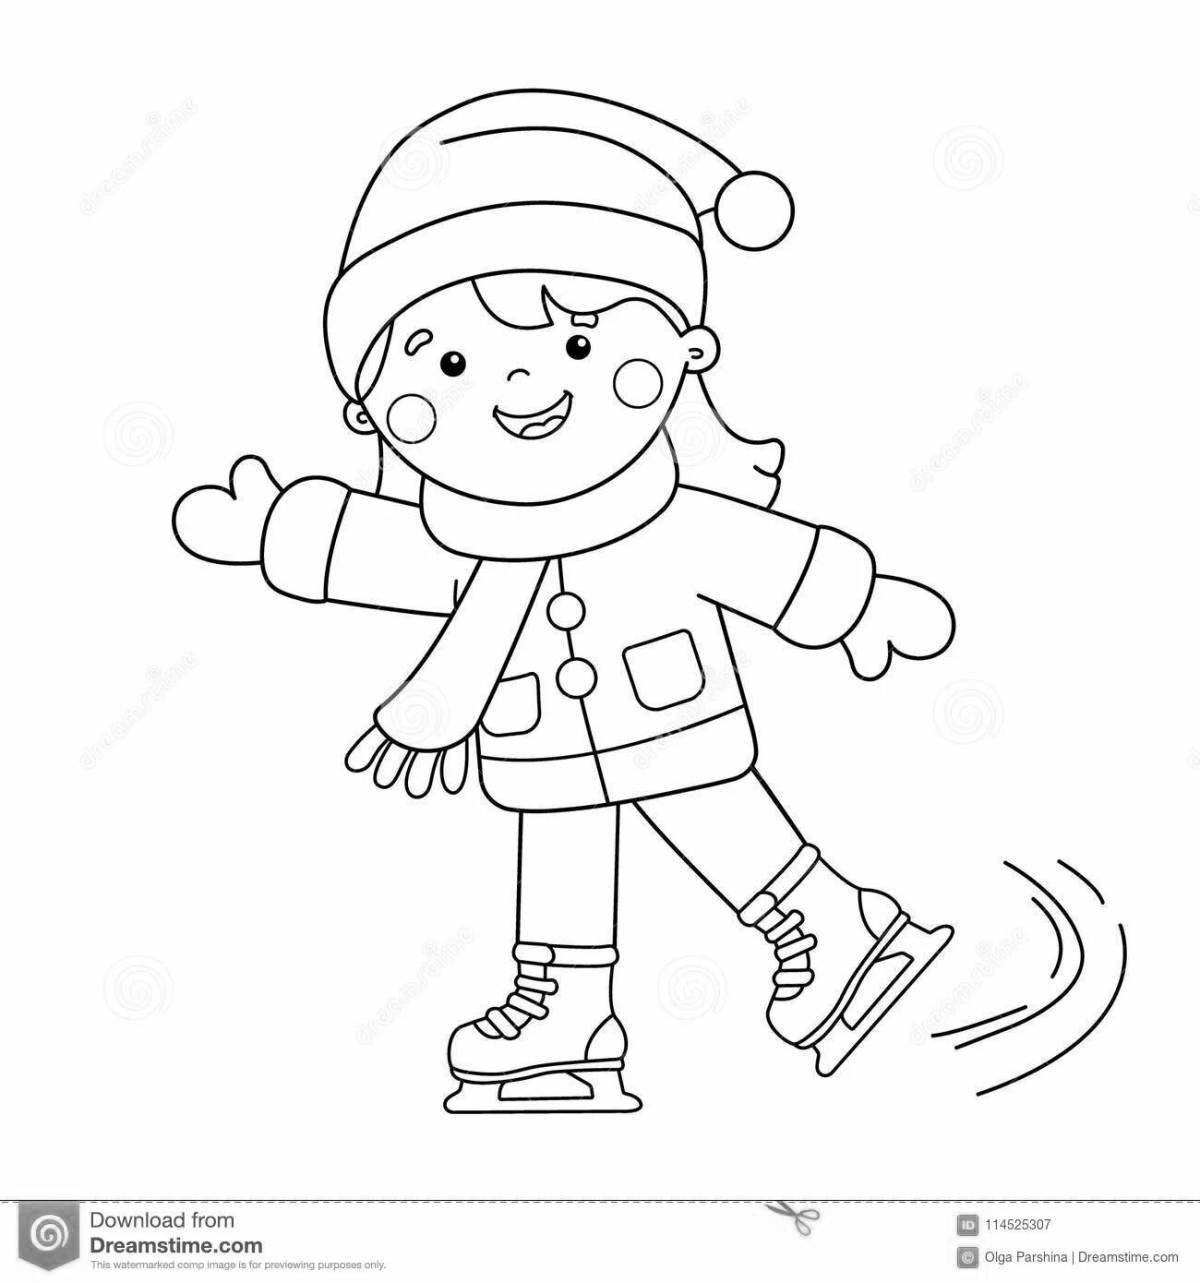 Radiant winter sports coloring book for preschoolers